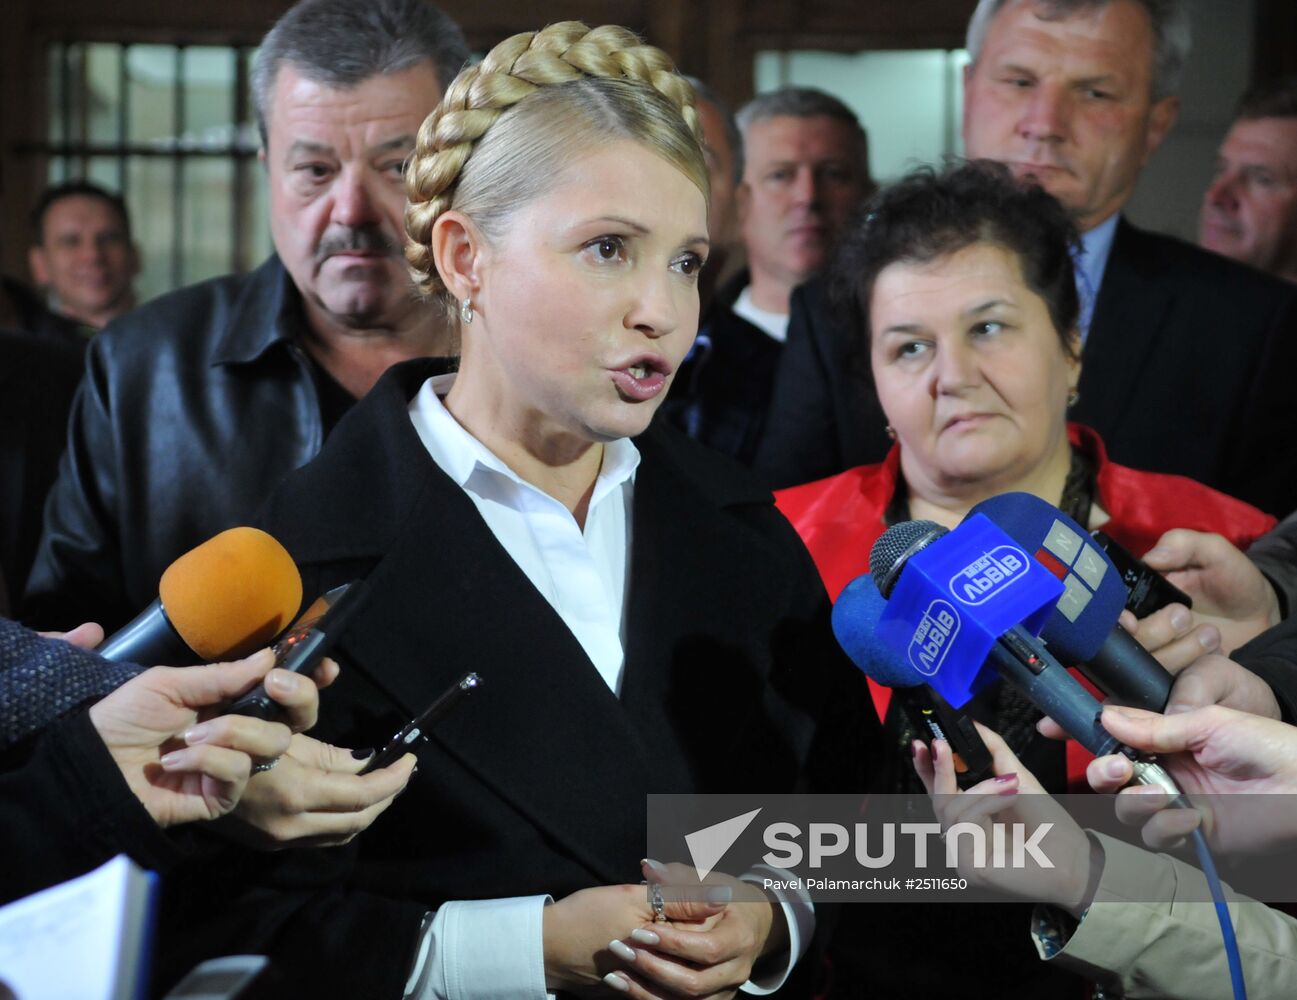 Parliamentary elections in Ukraine. Candidates meet with electorate